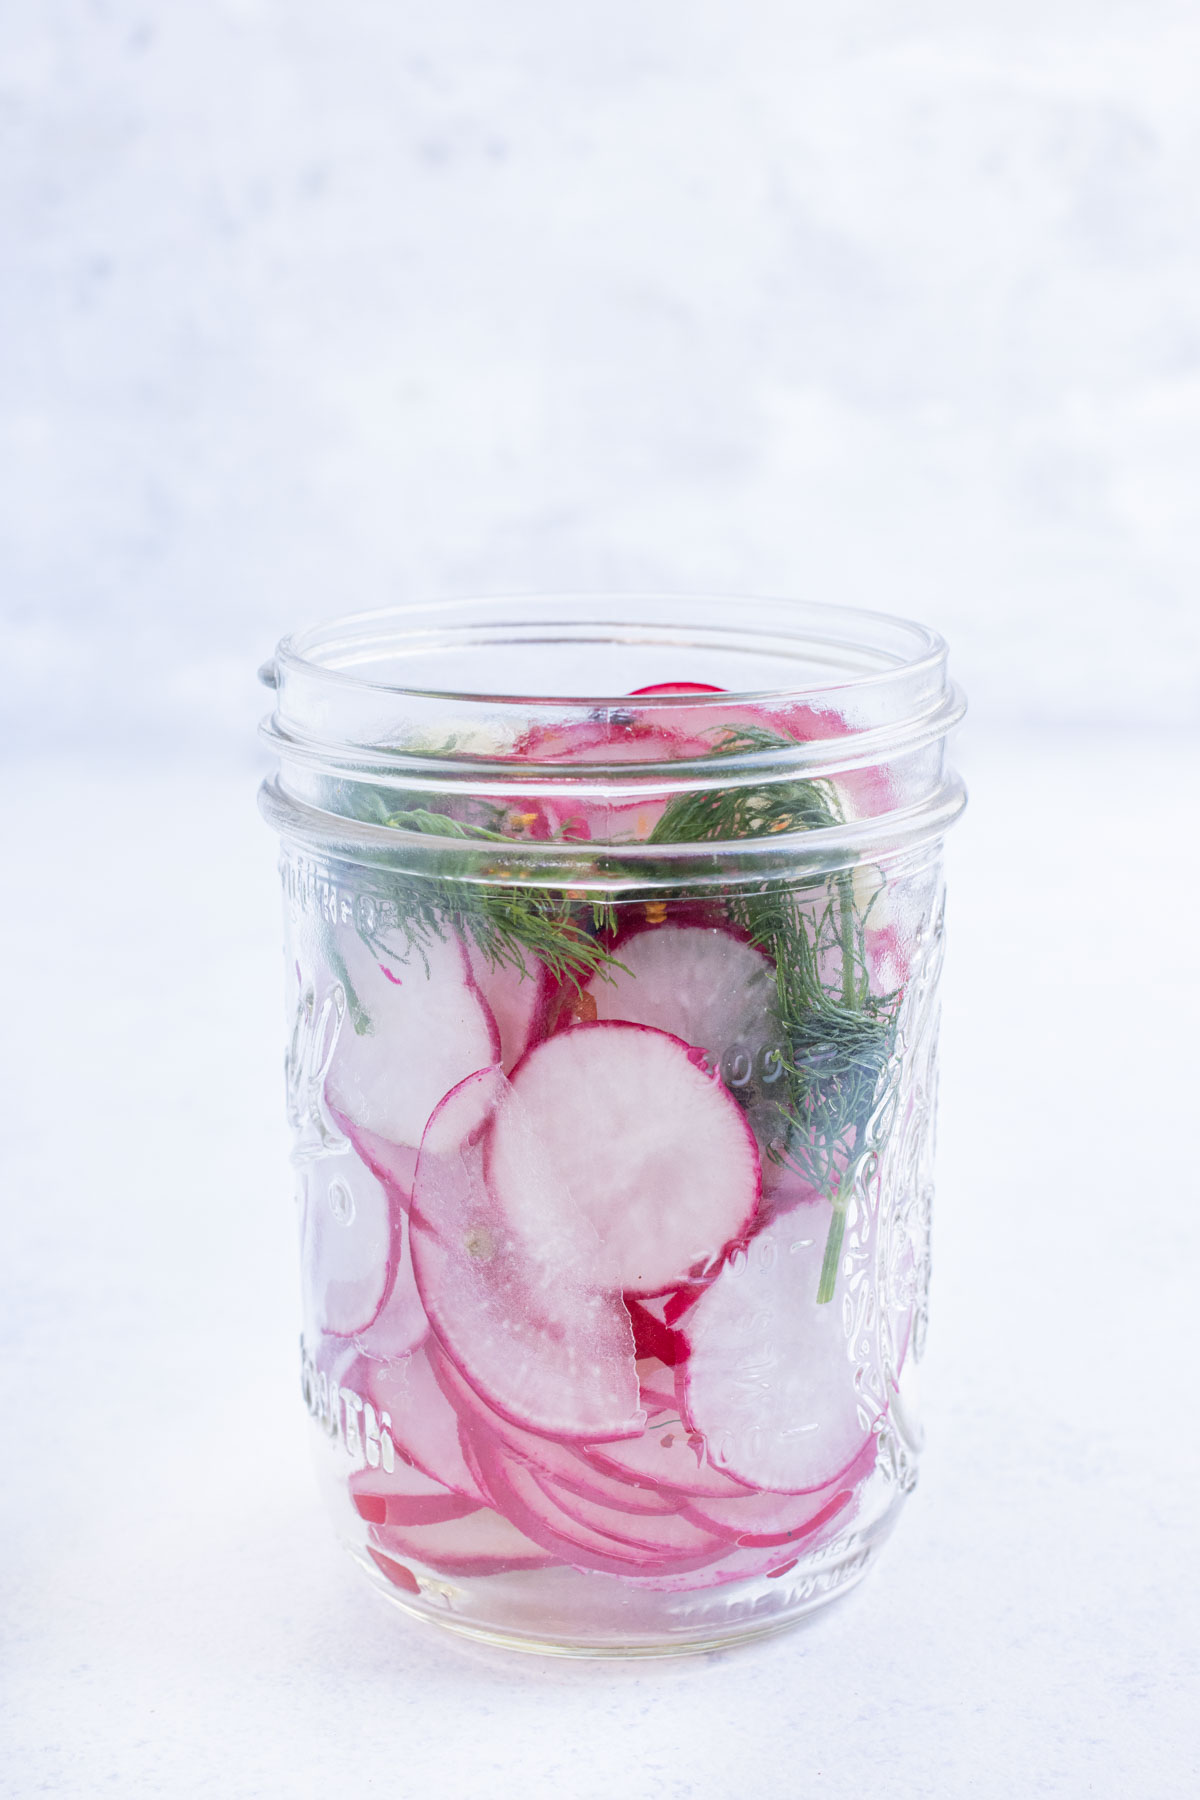 Radish, dill, garlic, and pepper are placed in a jar.